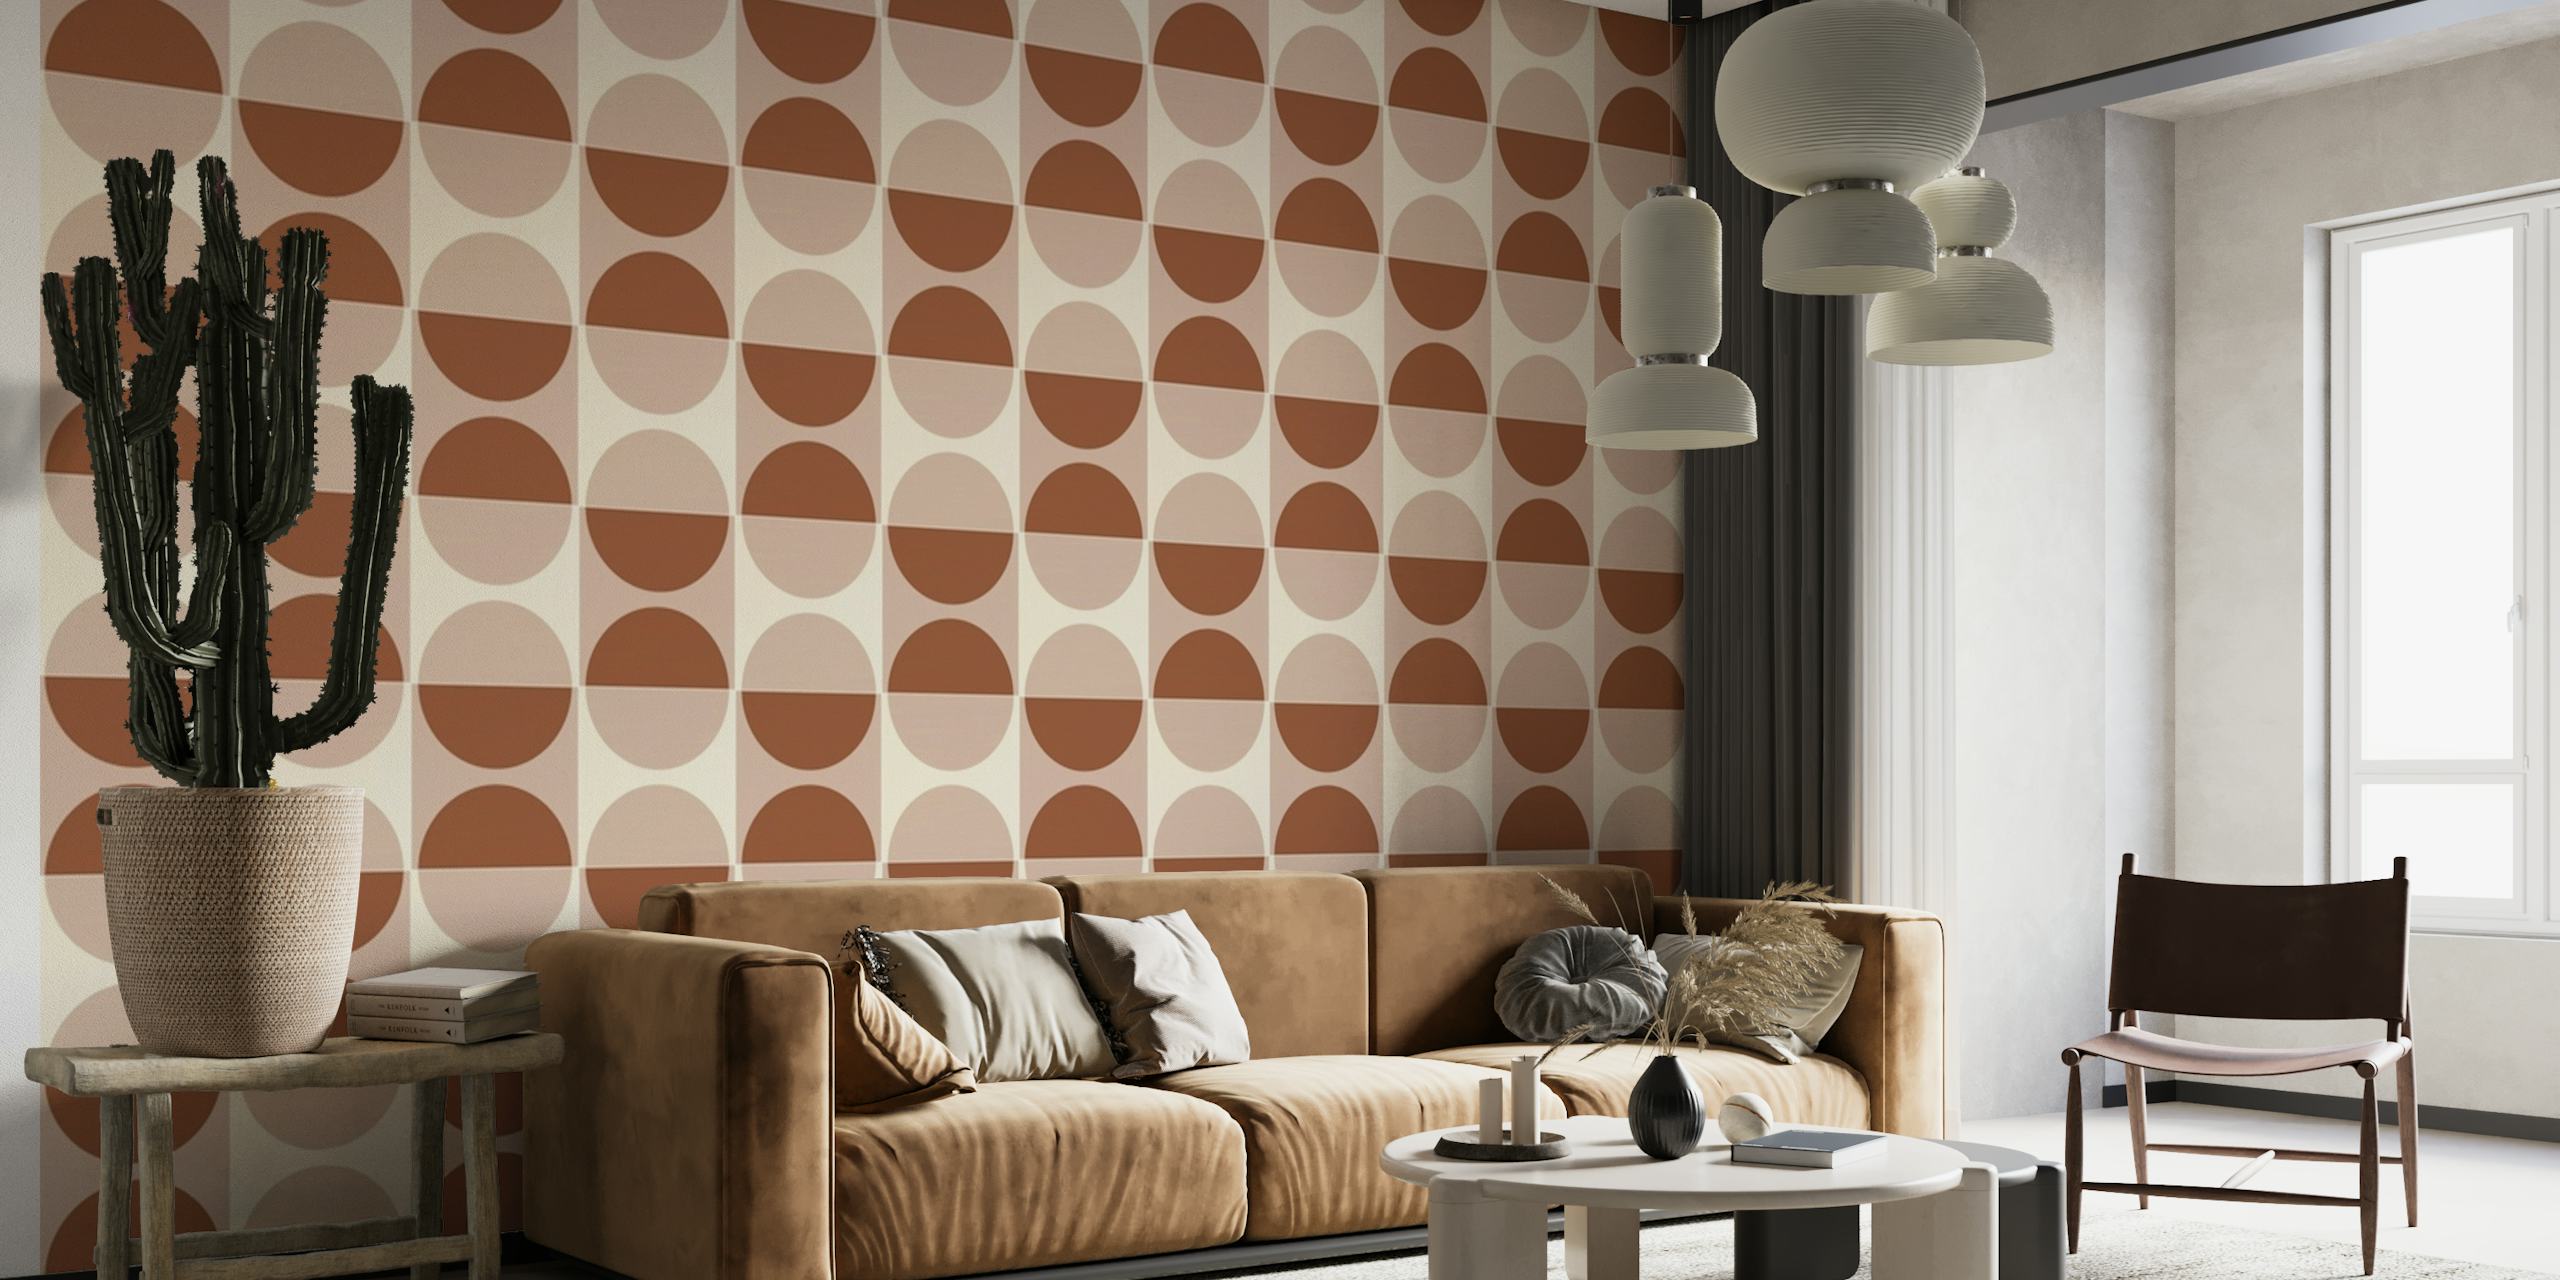 Painted Cotto Tiles Cinnamon and Powder ταπετσαρία